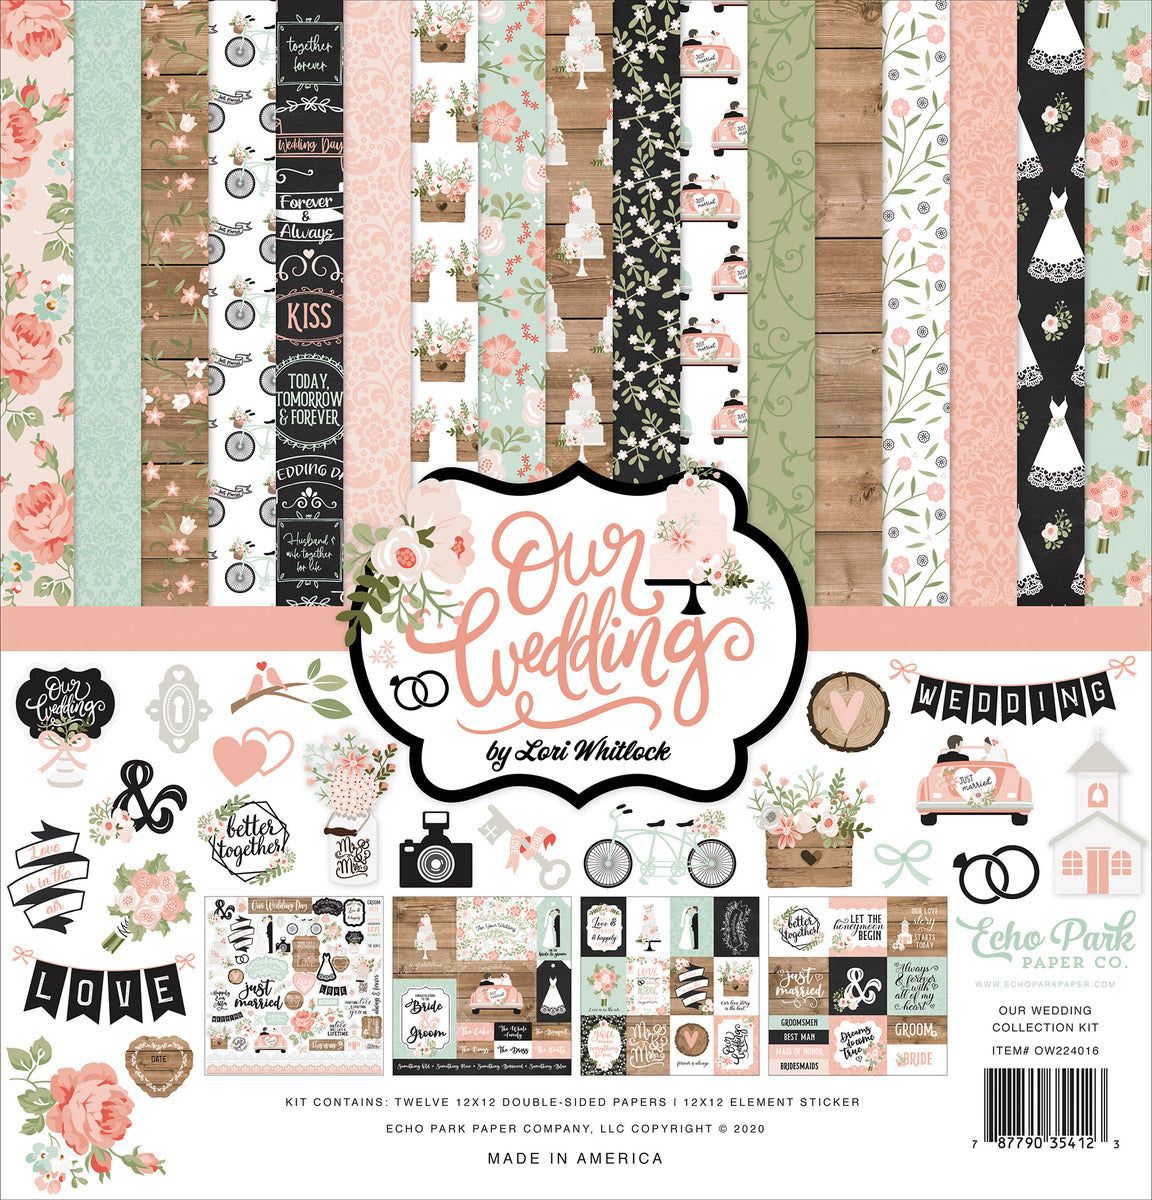 Our Wedding 12x12 collection kit from Echo Park Paper